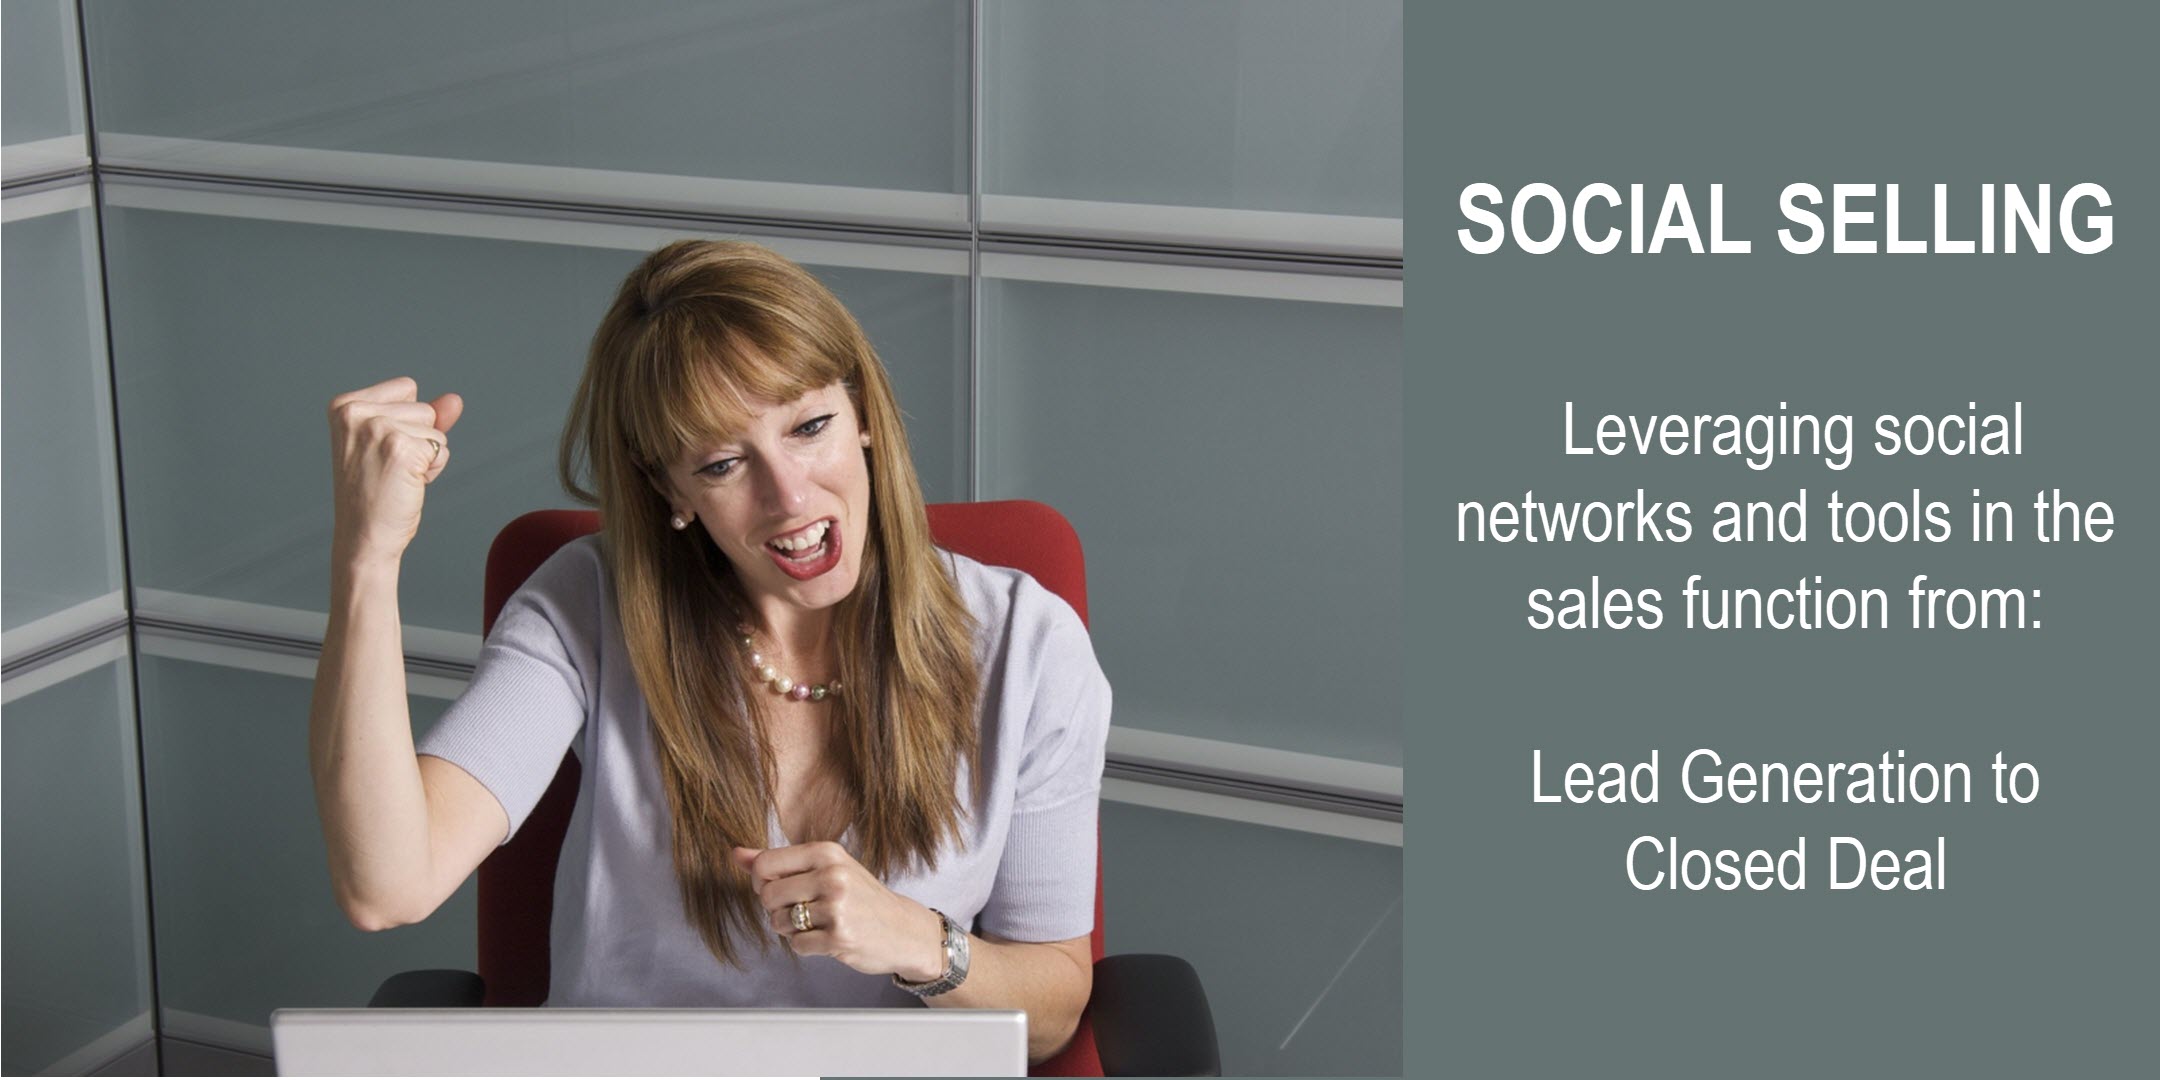 social selling the right way!